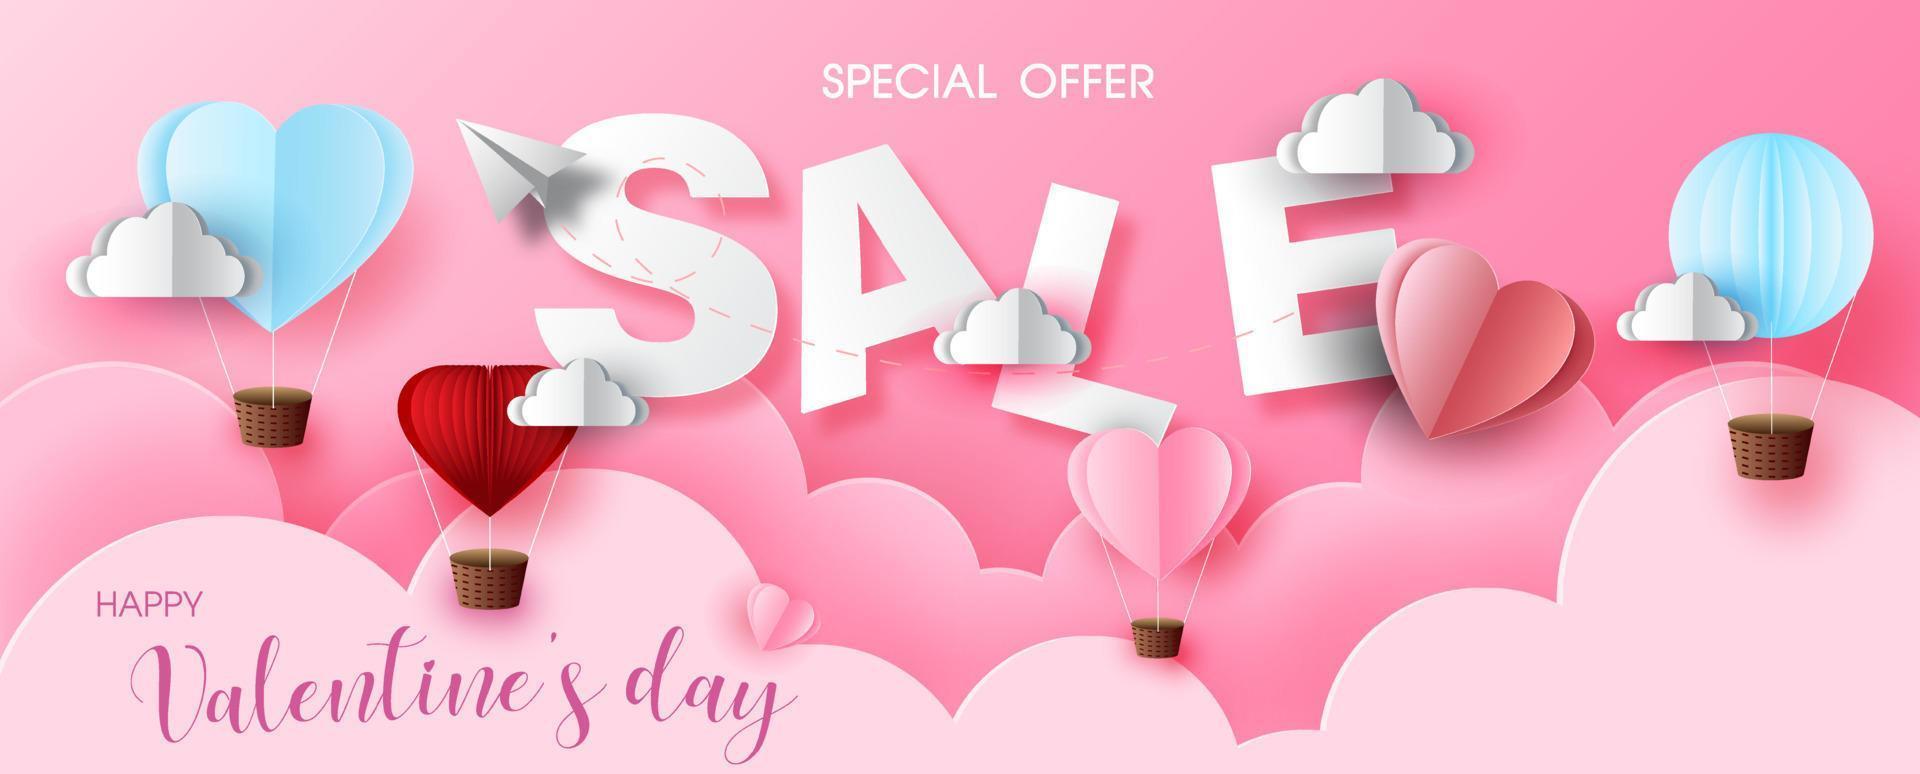 Valentine day's specials offer with sale wording in white frame and red harts on pink cloud and bokeh pattern background. Valentine greeting card in paper cut style and vector design.